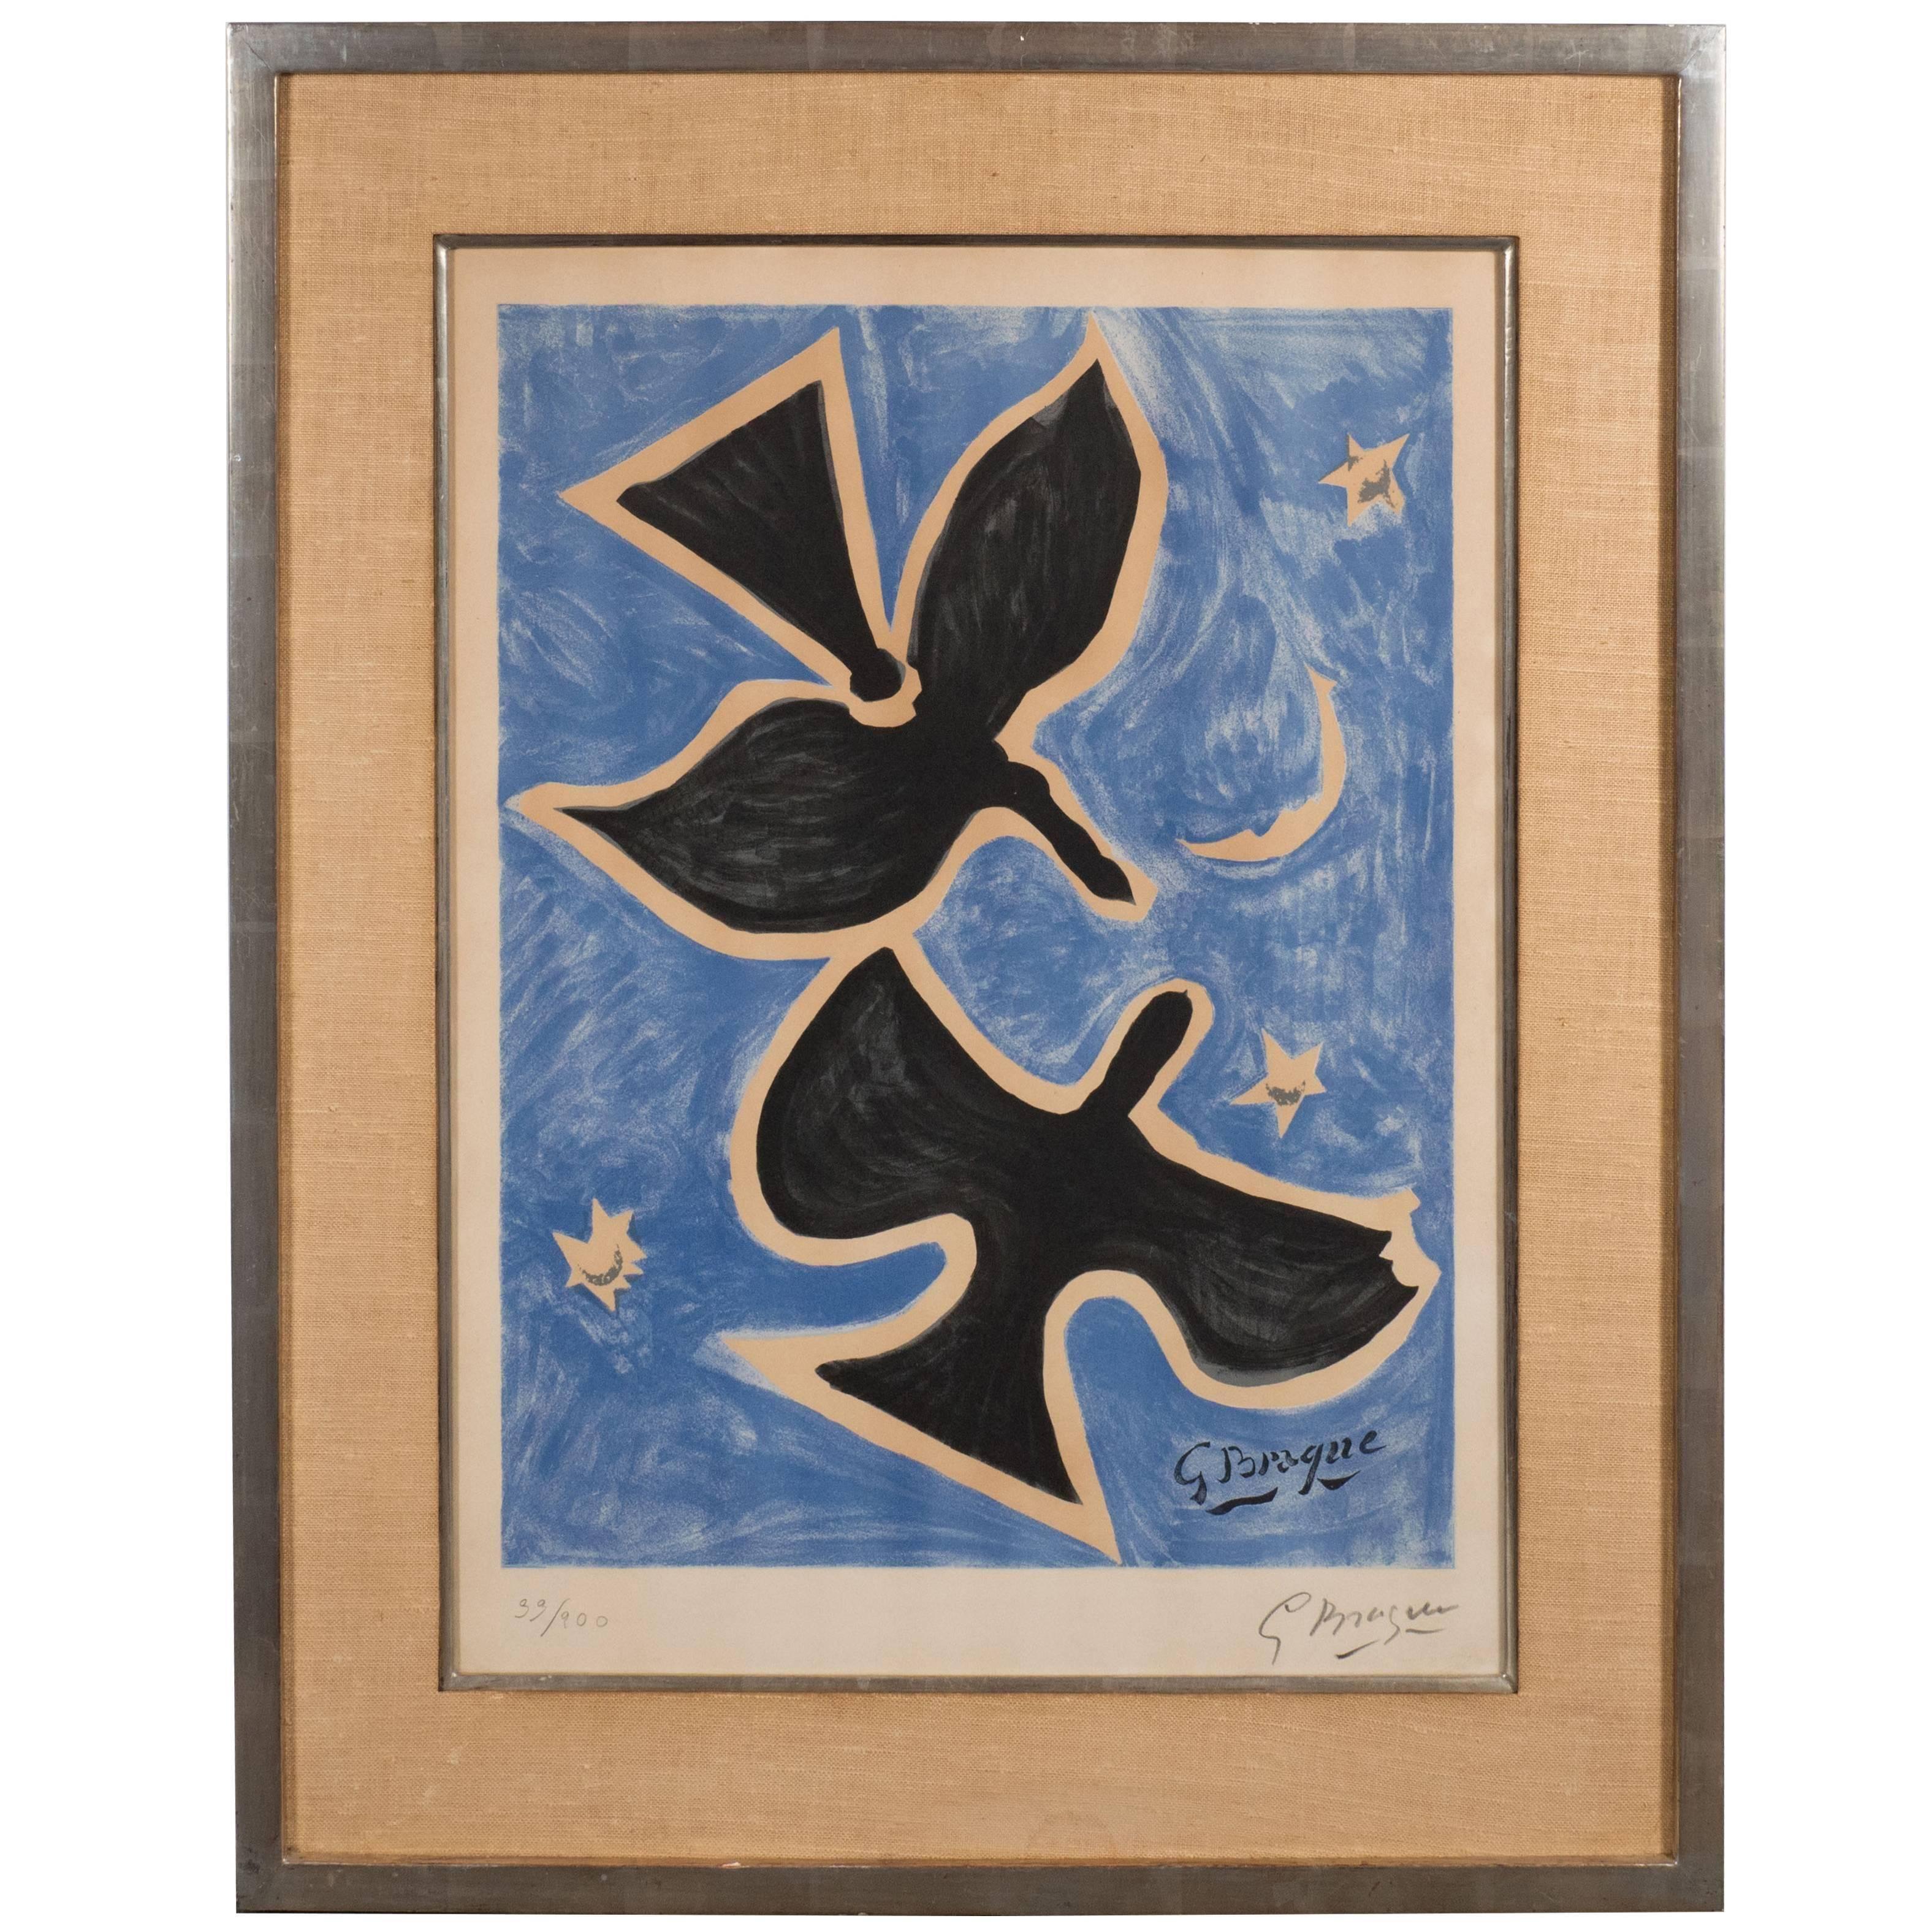 (after) Georges Braque Abstract Print - Signed mid-Century lithograph in colors titled "Two Birds"